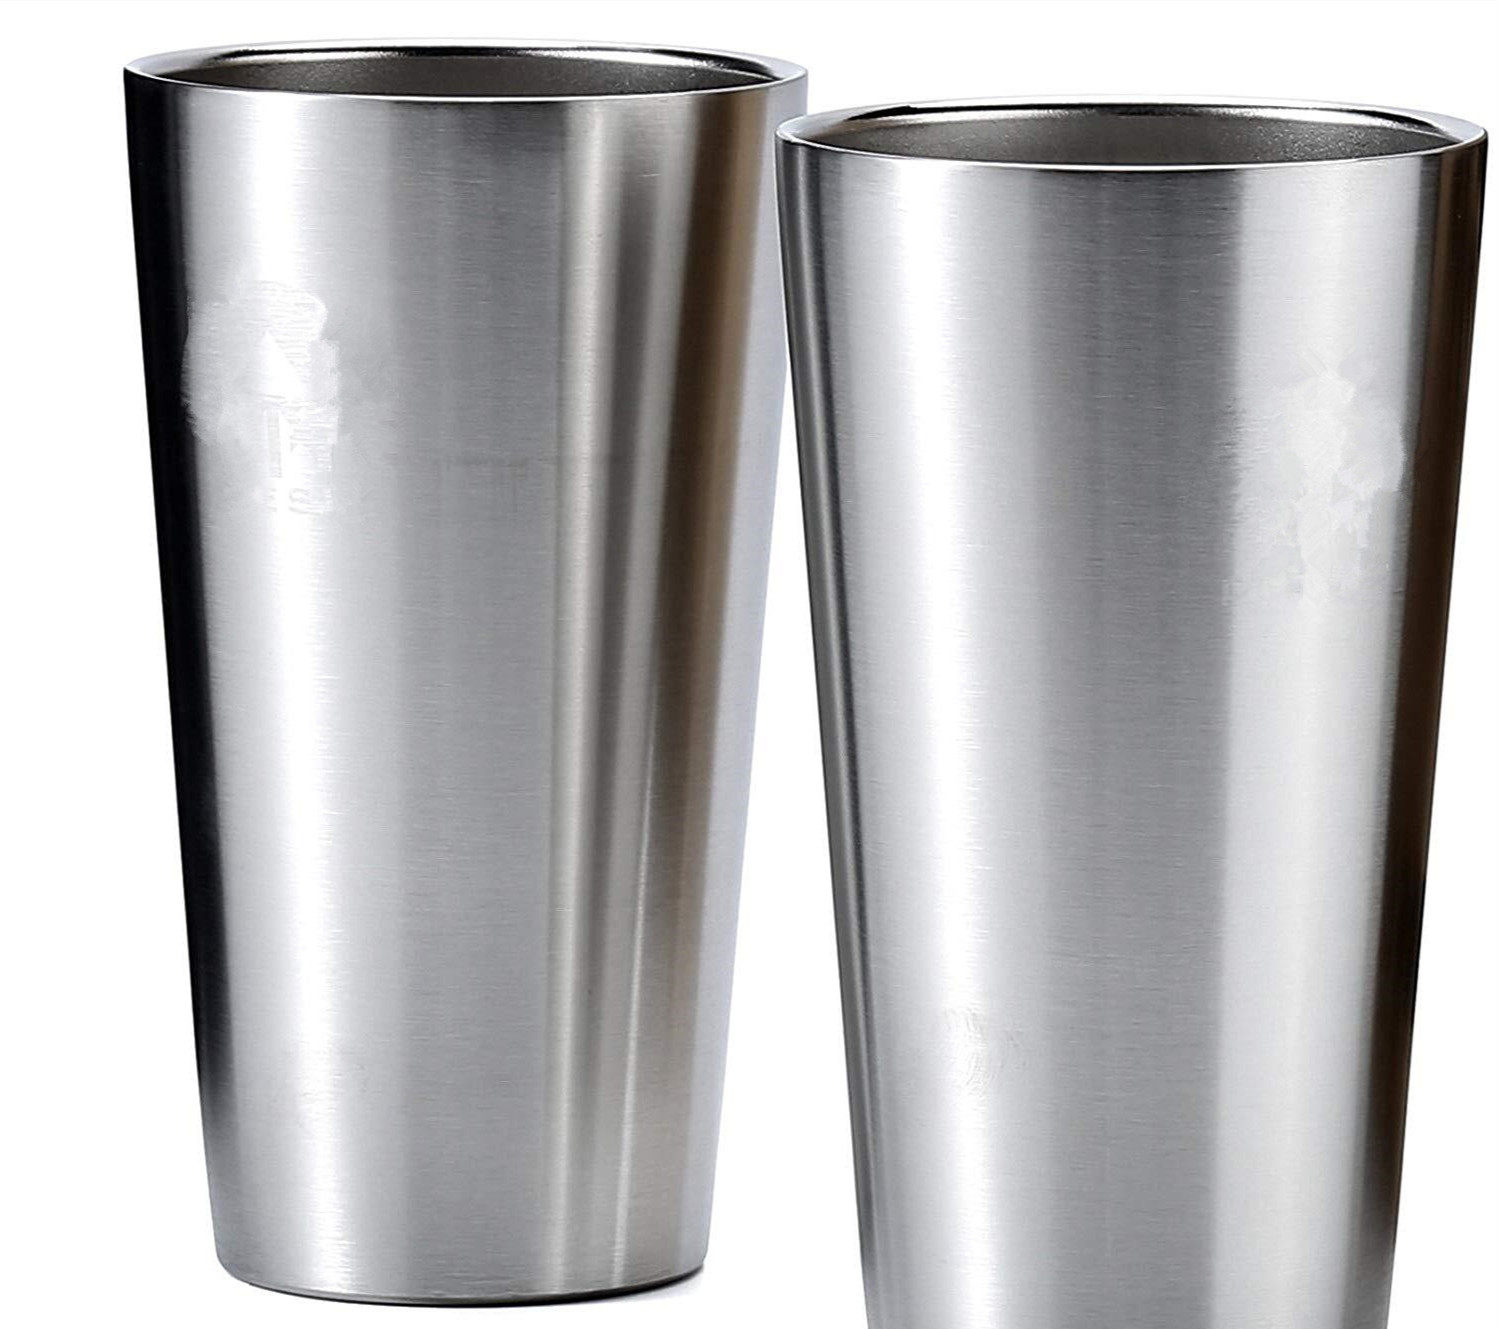 Stainless steel taper cup with cover|16oz